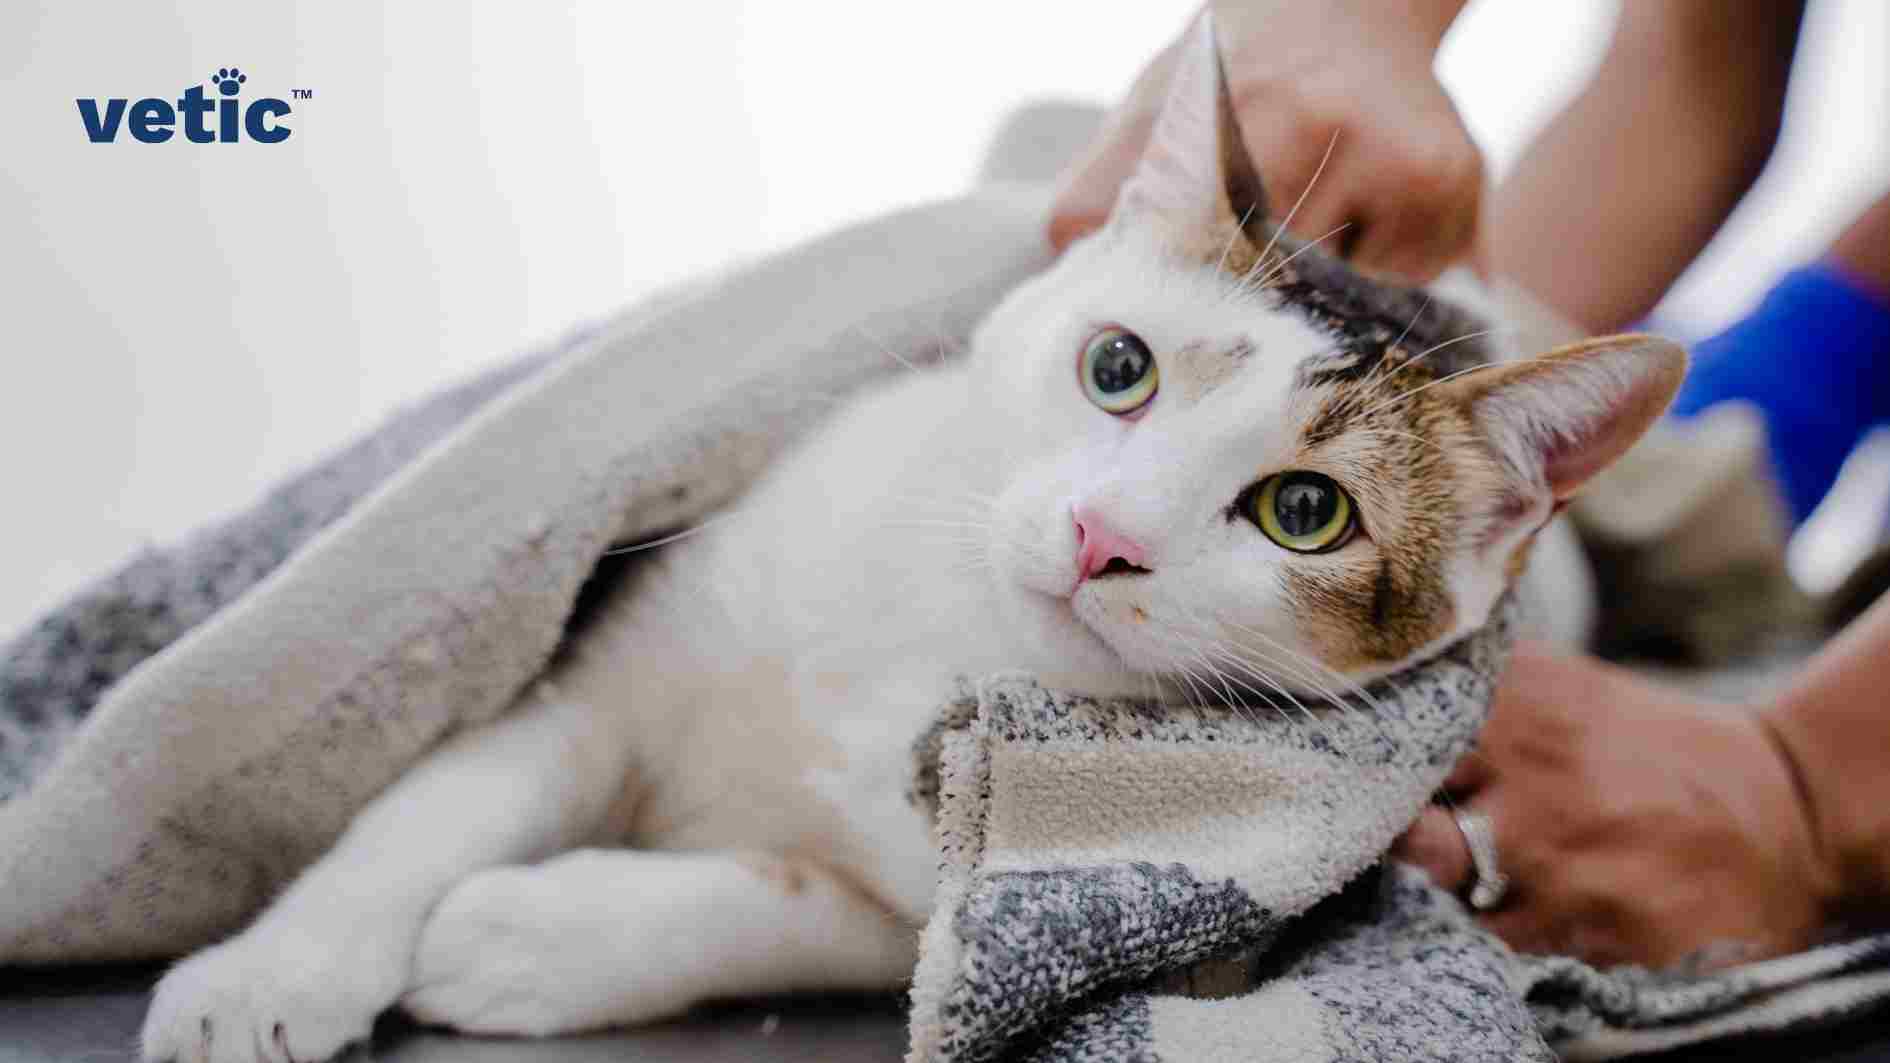 A photo of a cat inside the Vetic Pet Clinic, Thane. The cat has wide eyes and she is gently swaddled in a soft, grey blanket, preparing it for a nail trimming session. The professional groomer’s hands are visible, ensuring the cat is comfortably secure to prevent anxiety during the nail clipping process. This image perfectly illustrates the preparatory steps aligning with “Trimming Your Cat’s Nails” by showcasing how to swaddle an anxious cat. A cat with wide eyes being swaddled in a grey blanket by a groomer A groomer’s hands holding a cat’s head and body in a soft, grey blanket A swaddled cat with a curious expression on a blue surface